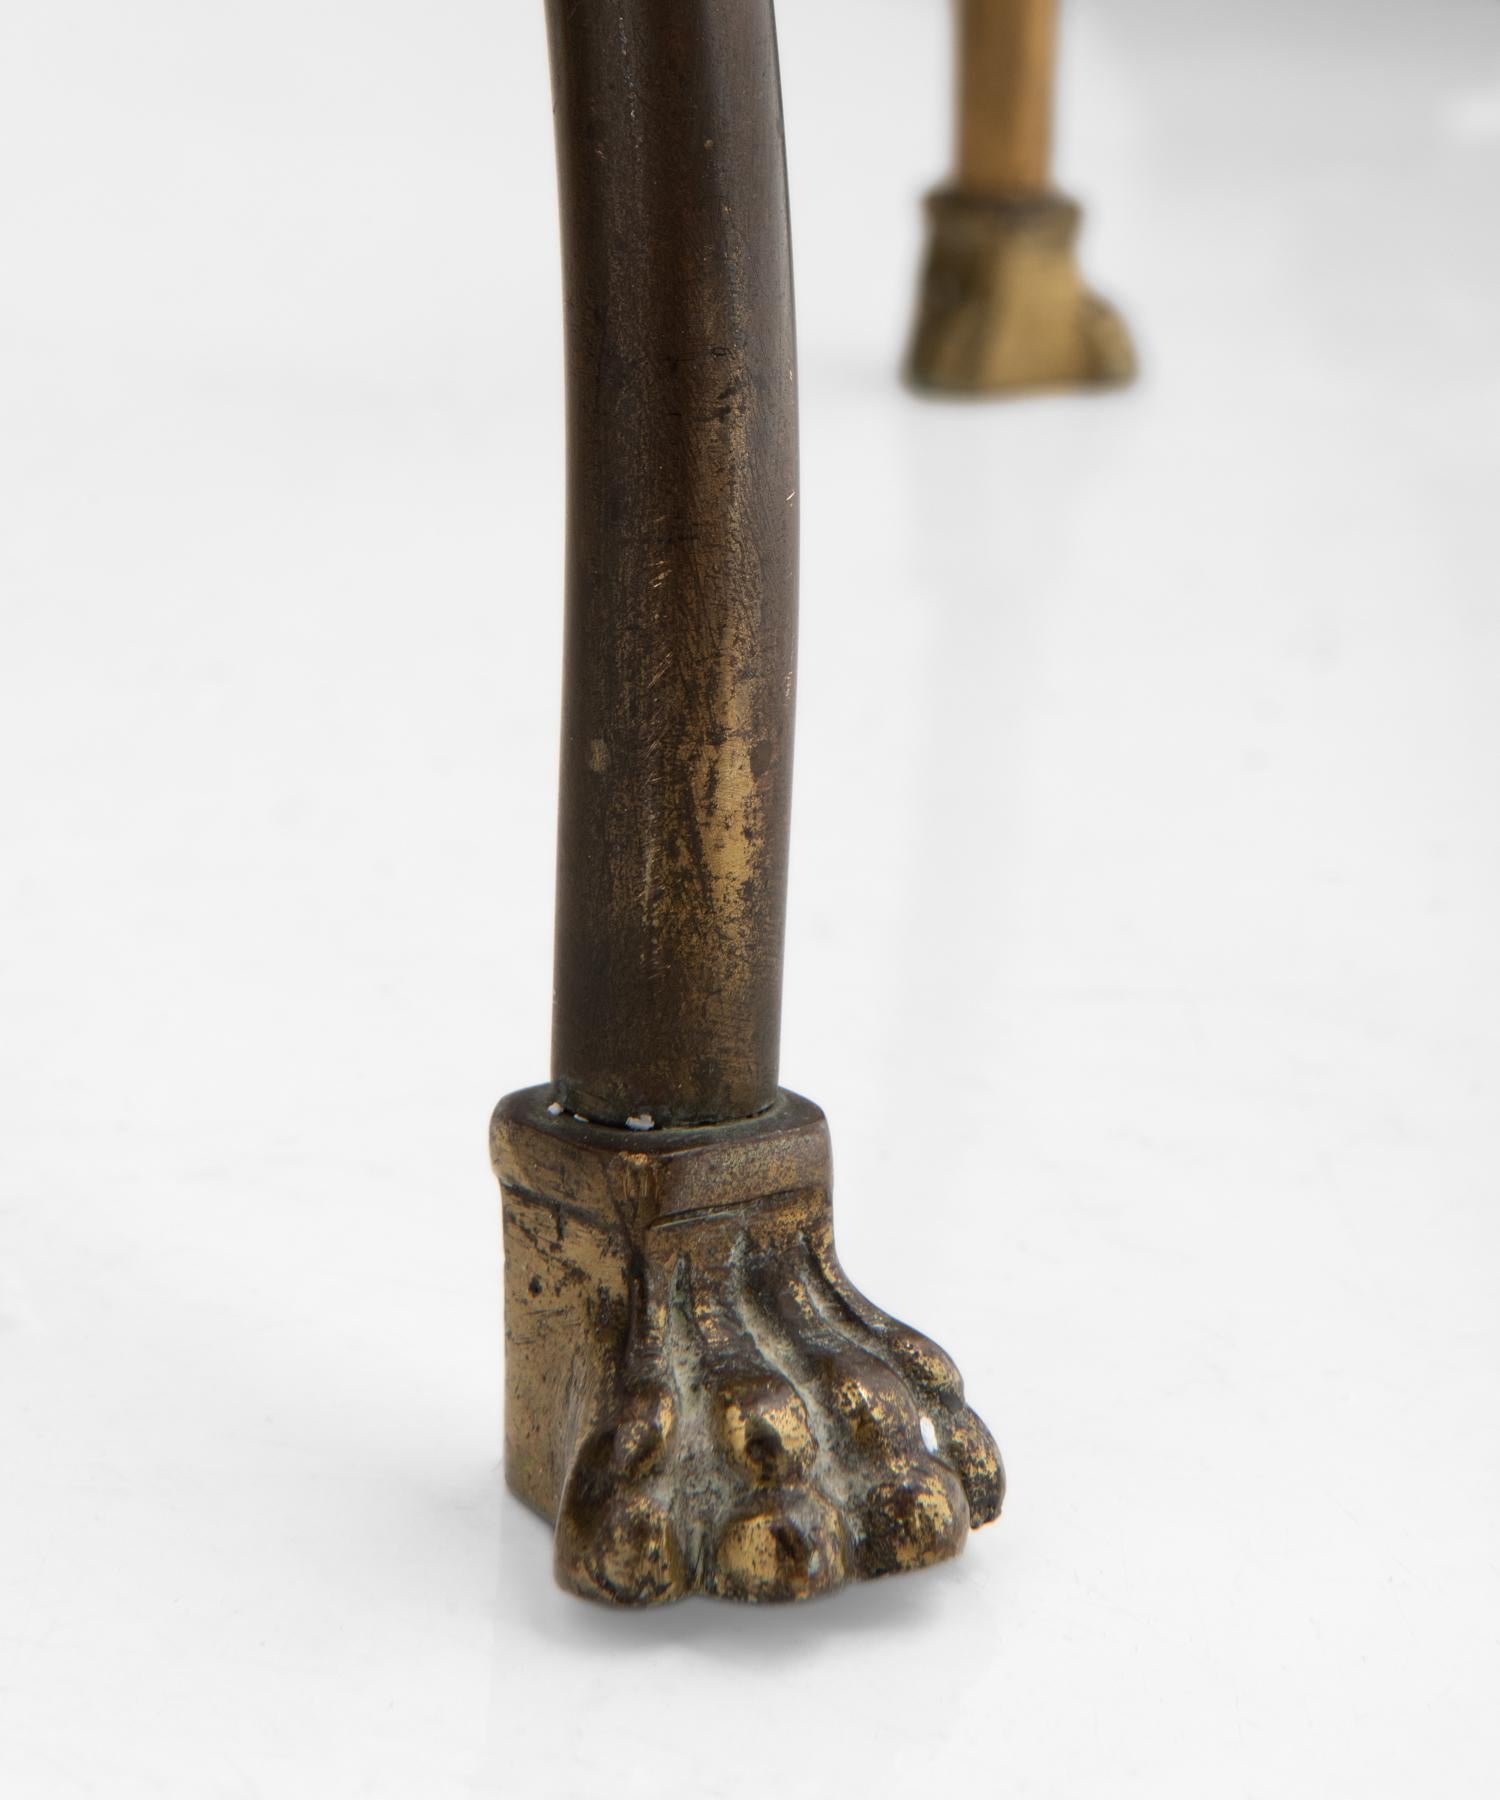 Brass Adjustable Reading Lamp with Claw Feet, France, circa 1930